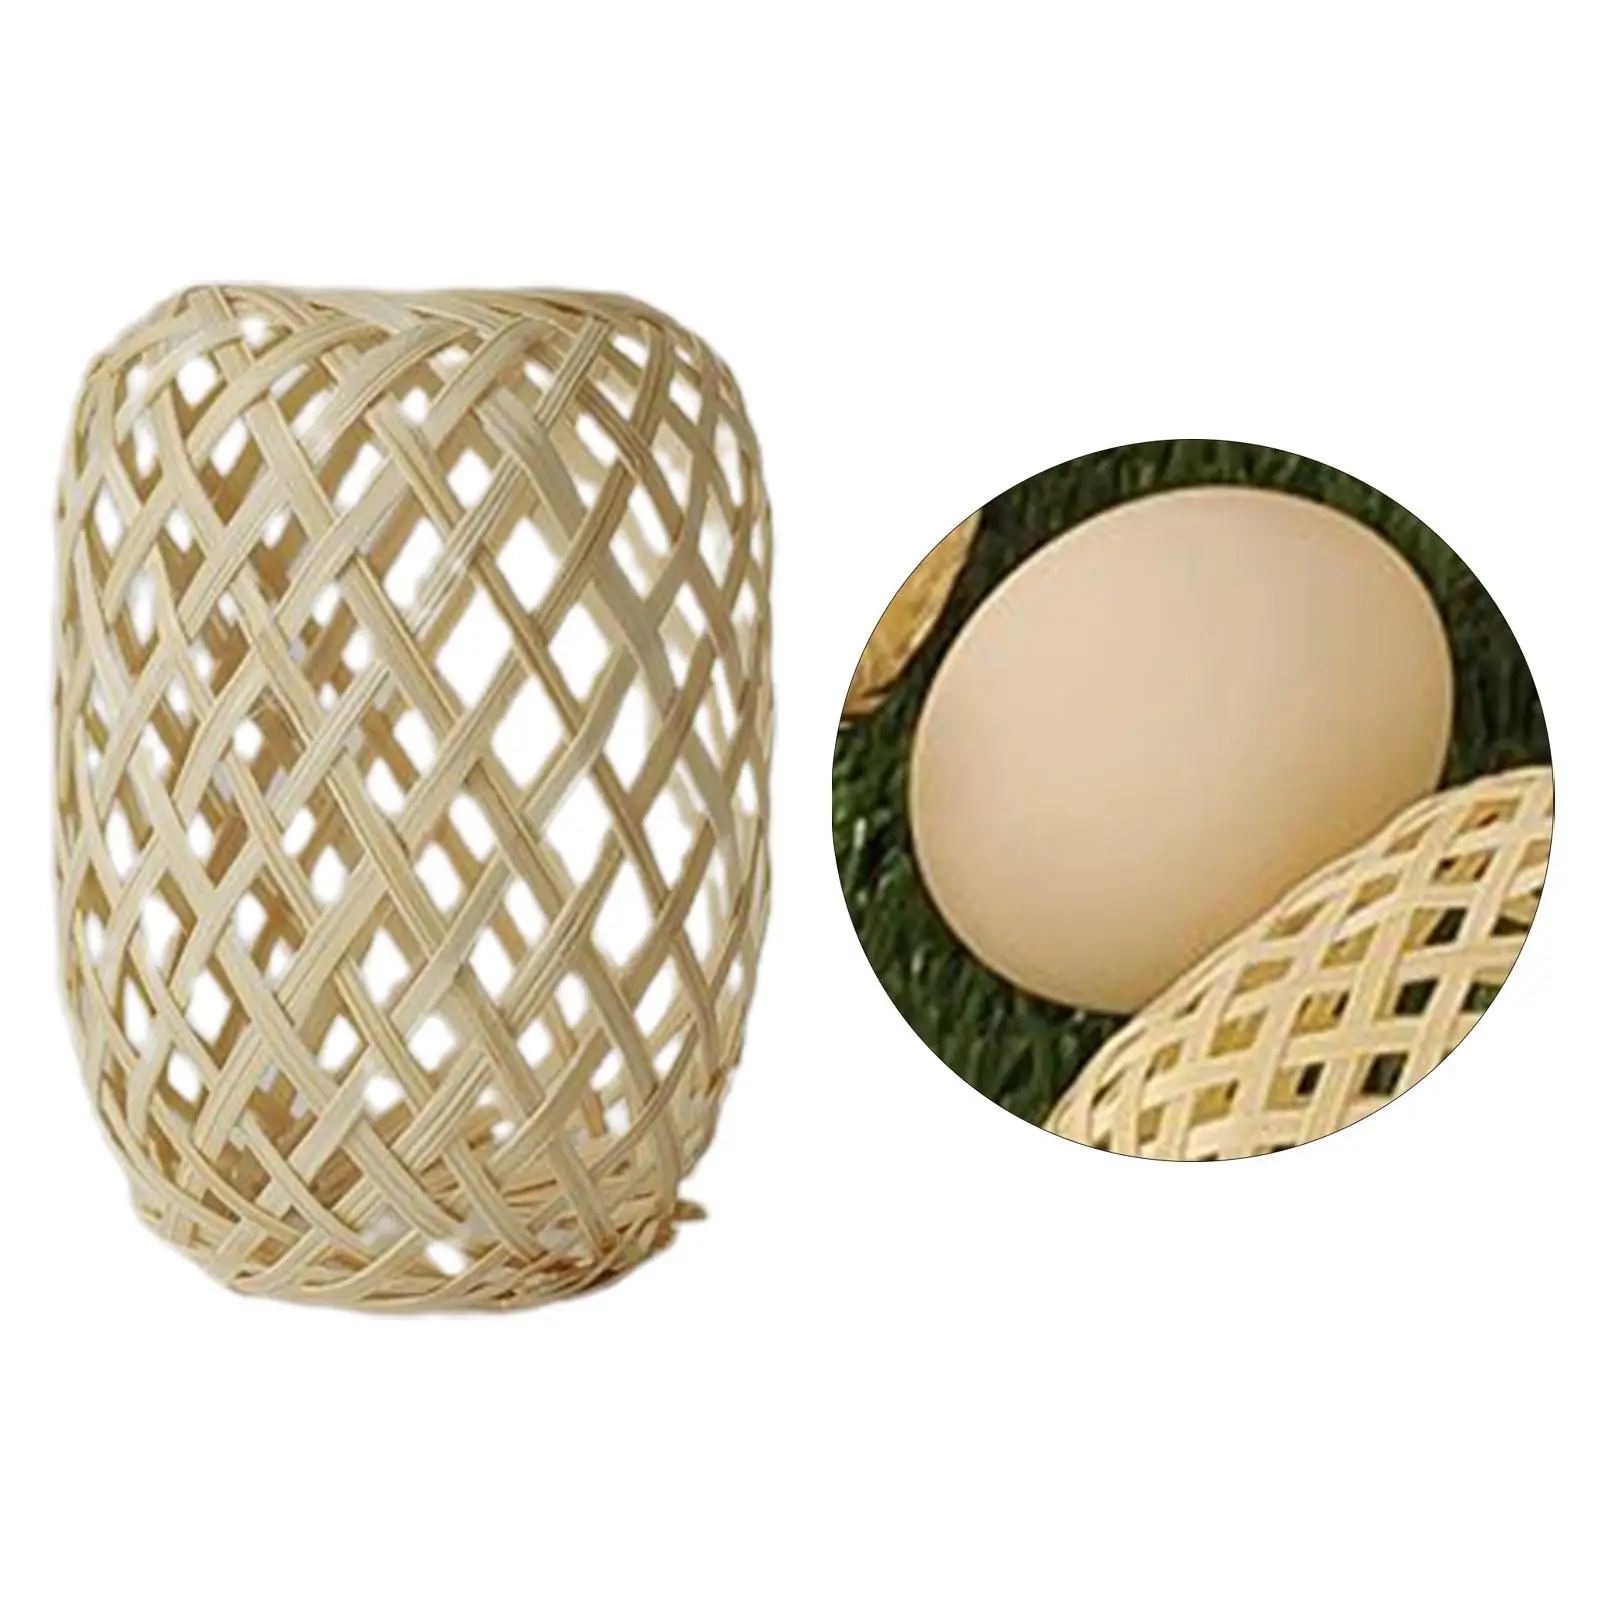 Classic Lantern Decor Pendant Light Cover DIY Supply Bamboo Woven Lampshade for Automative Bedroom Kitchen Dining Room Office